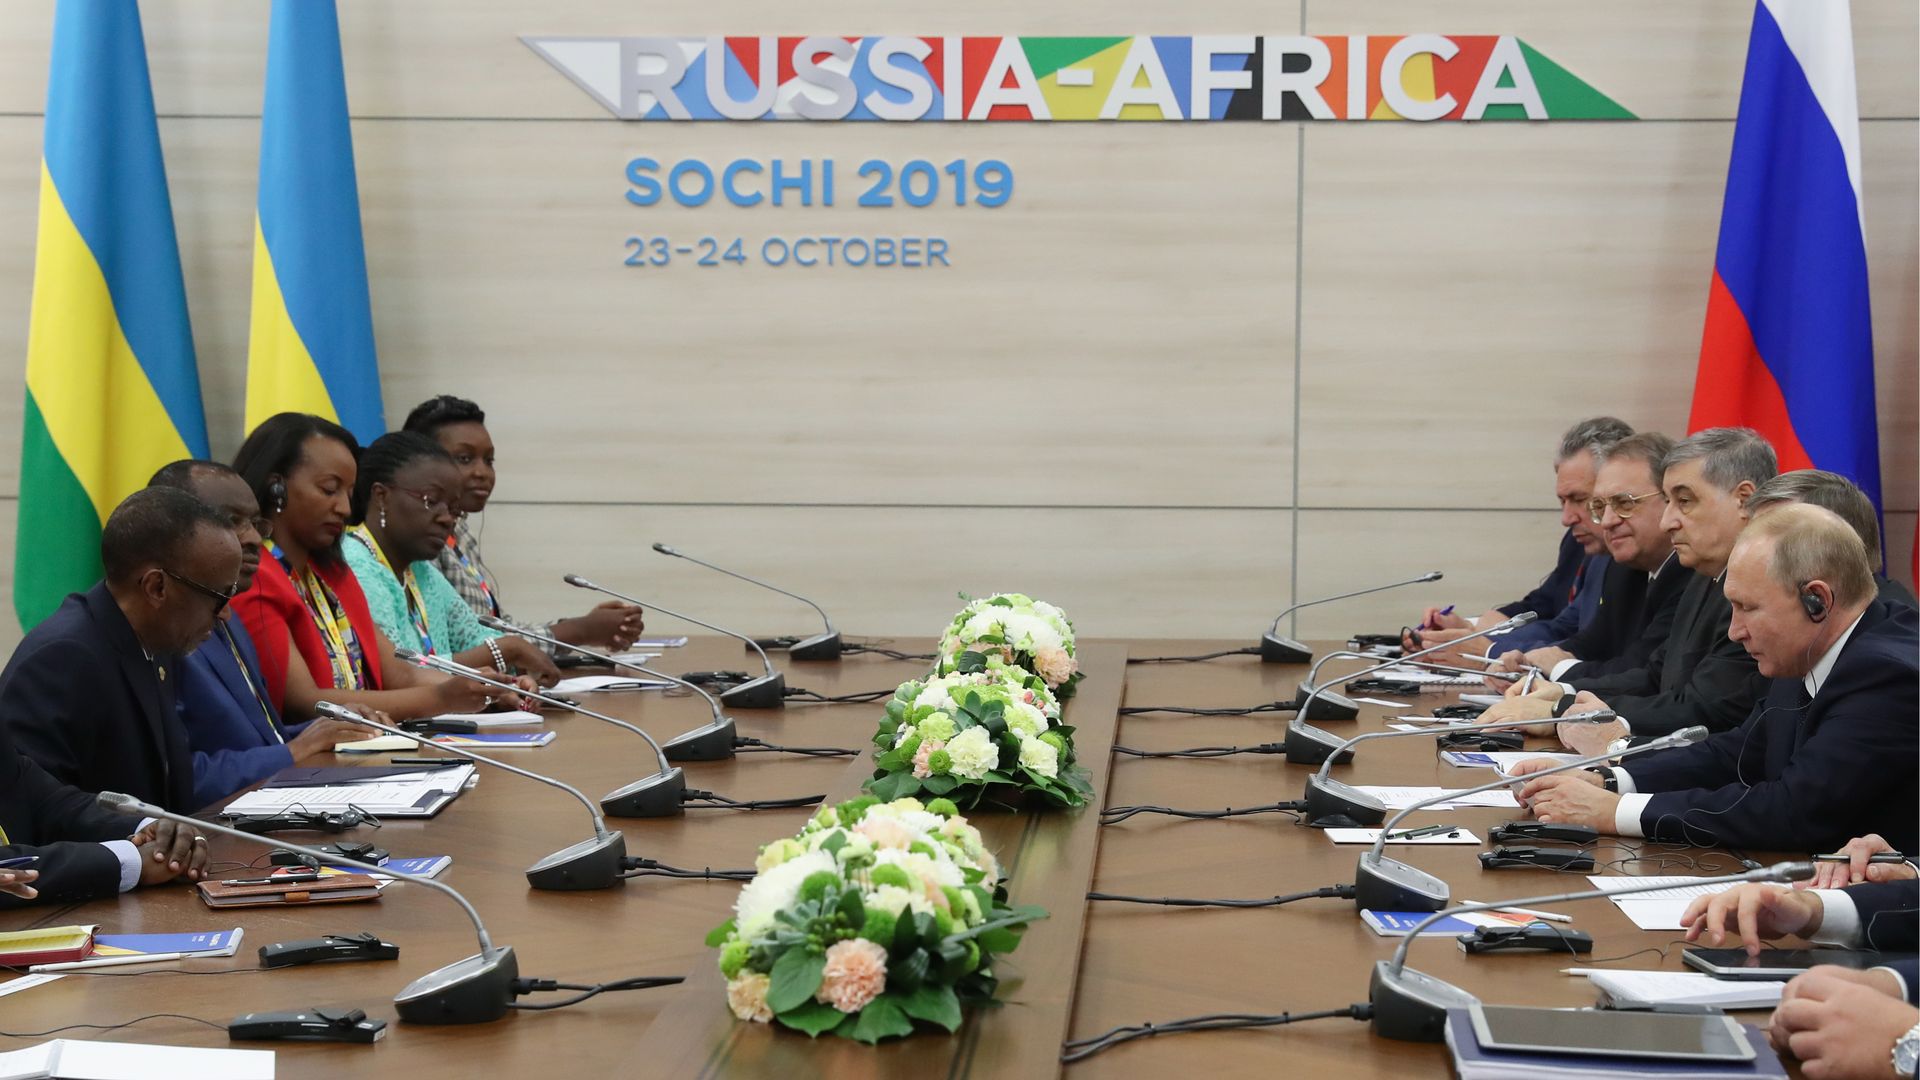 Putin, Kagame and fellow Russian and Rwandan officials seated across a conference table